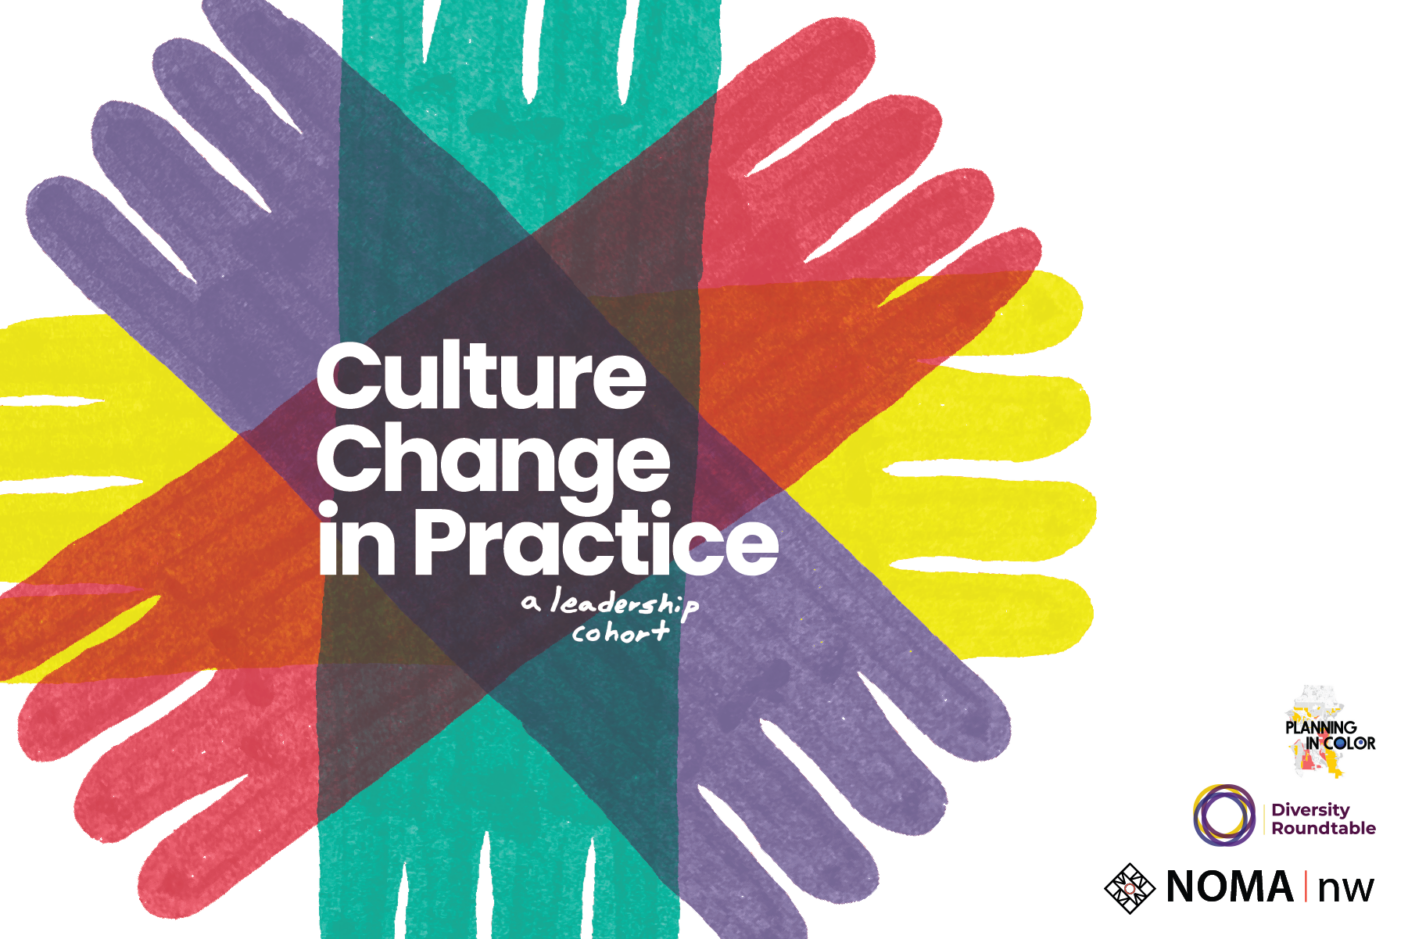 AIA Seattle, in close collaboration with NOMA Northwest and Planning in Color, is proud to announce its third – and newly revitalized – edition of the Culture Change in Practice program.